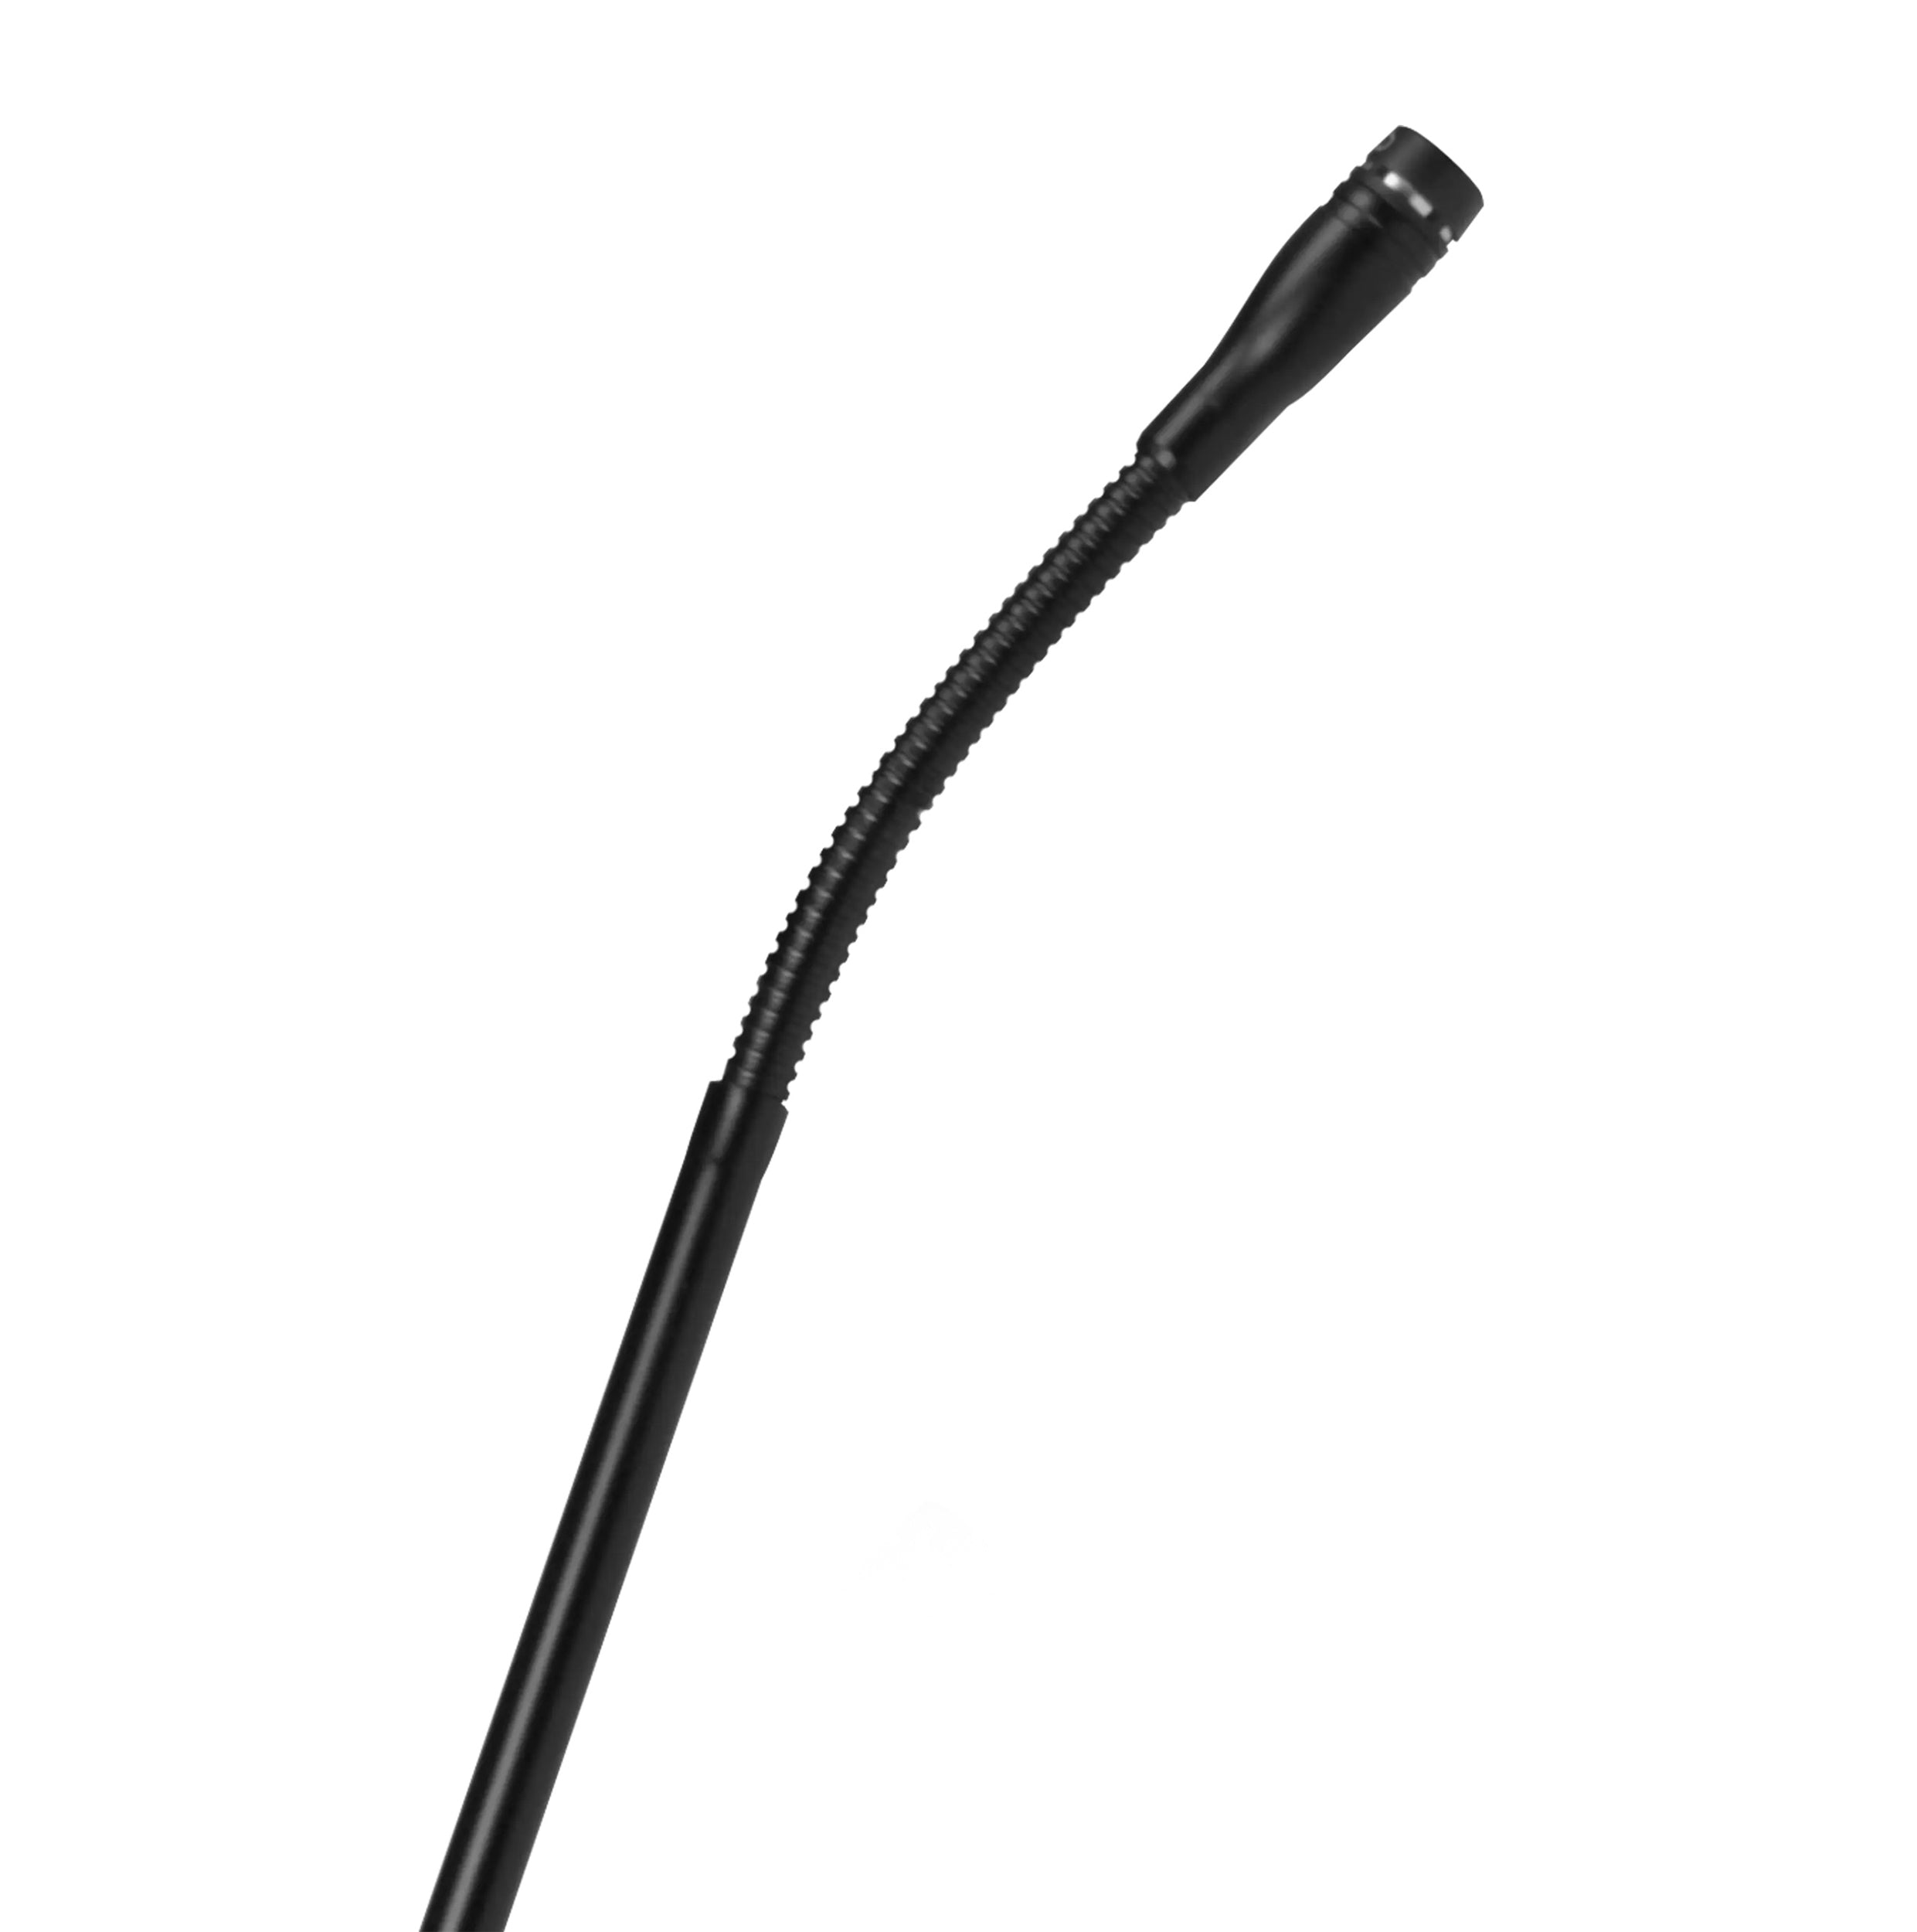 Shure MX424/C, 24-Inch Micro Flex Cardioid Gooseneck Condenser Microphone with Preamp by Shure